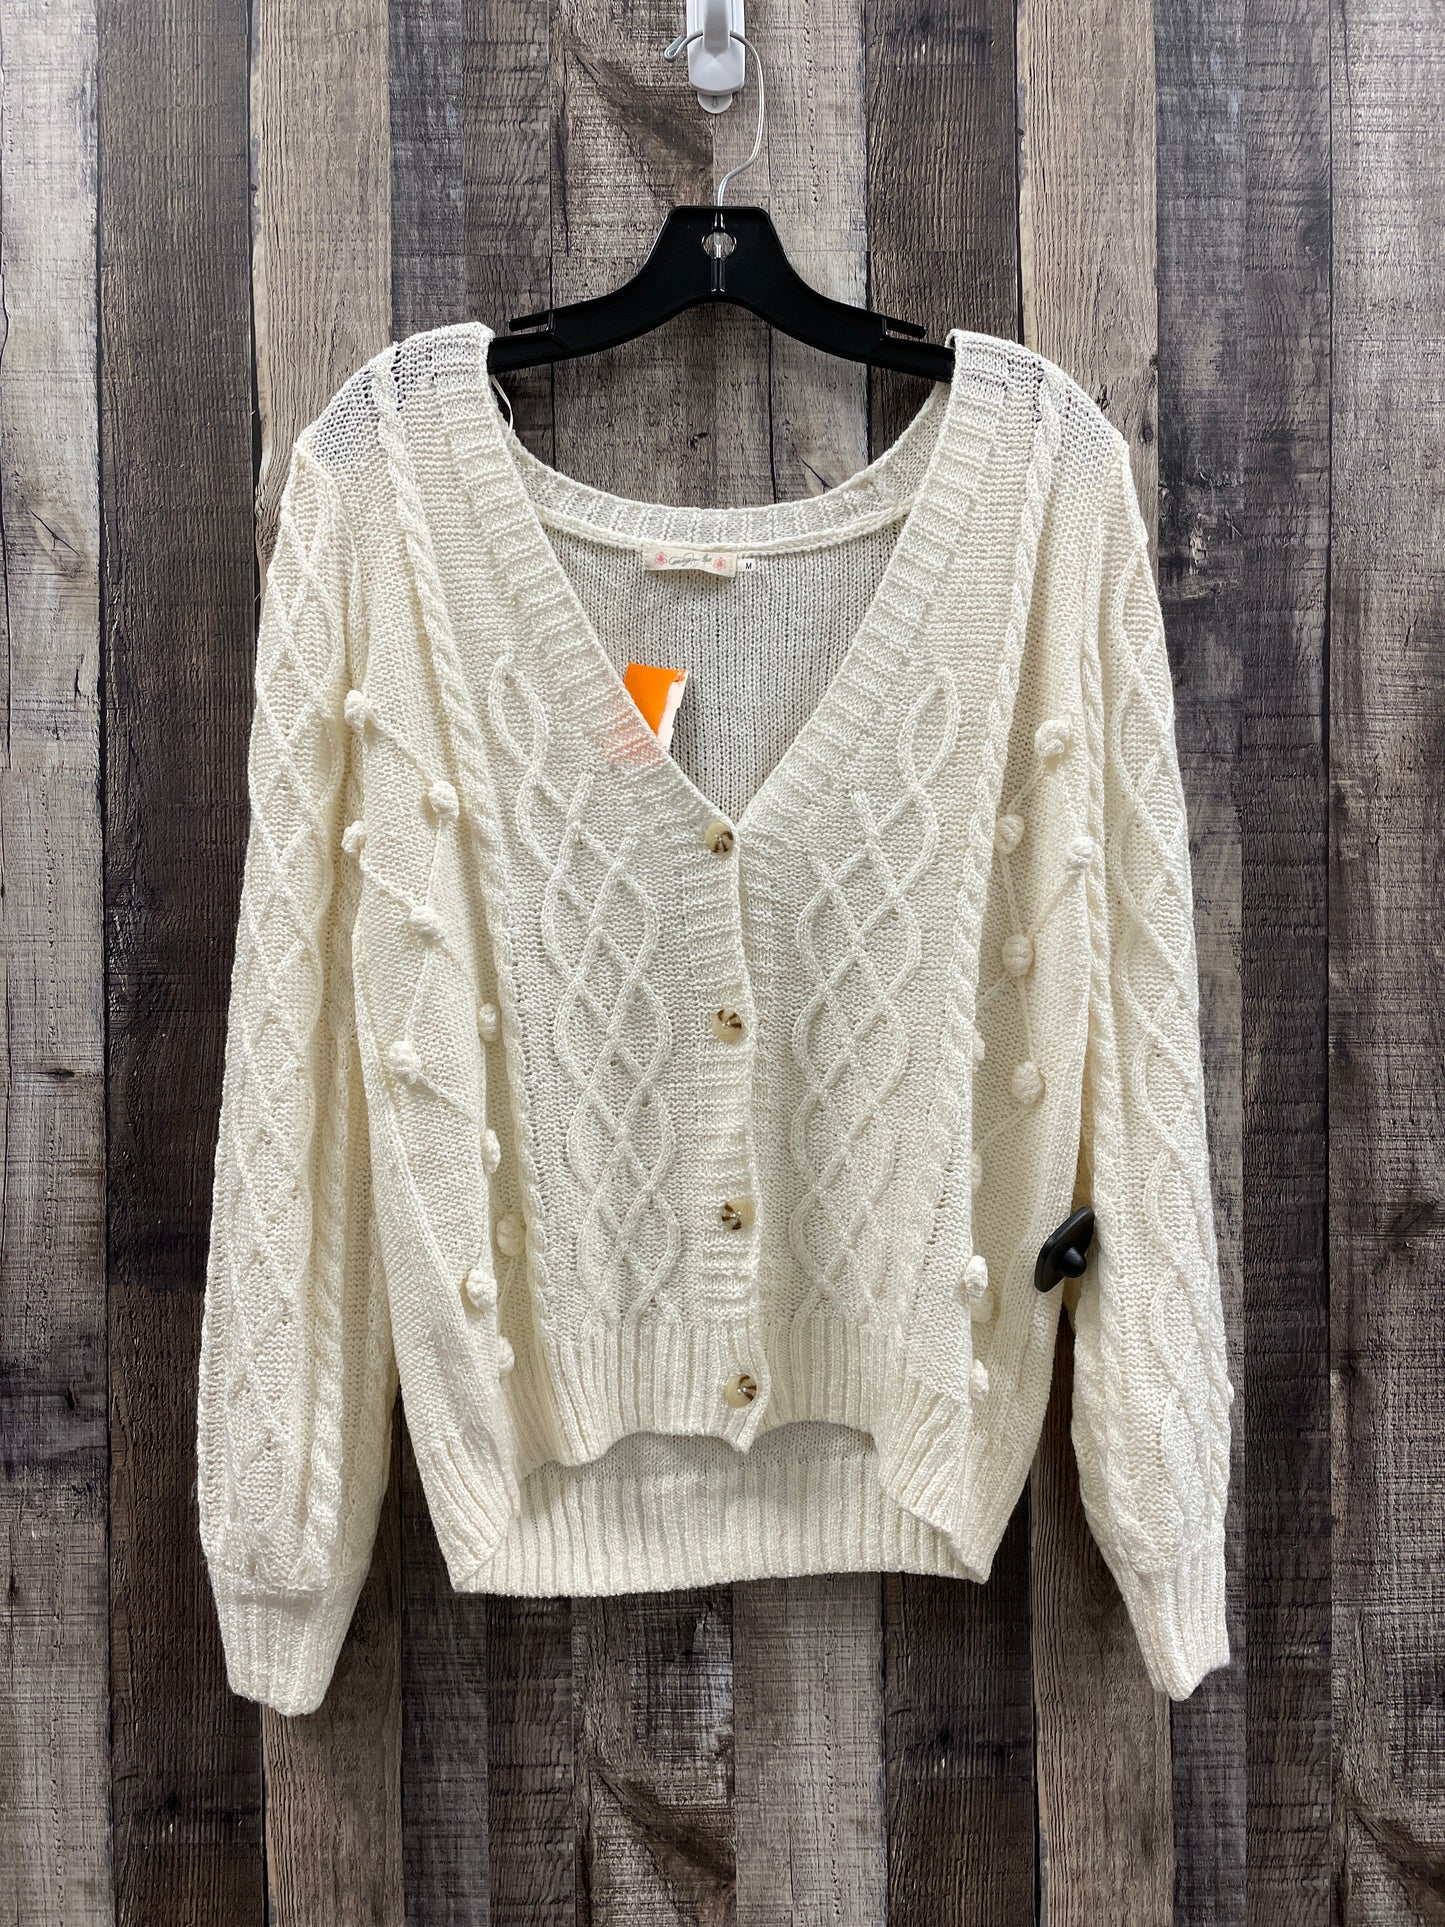 Sweater Cardigan By Cme  Size: M